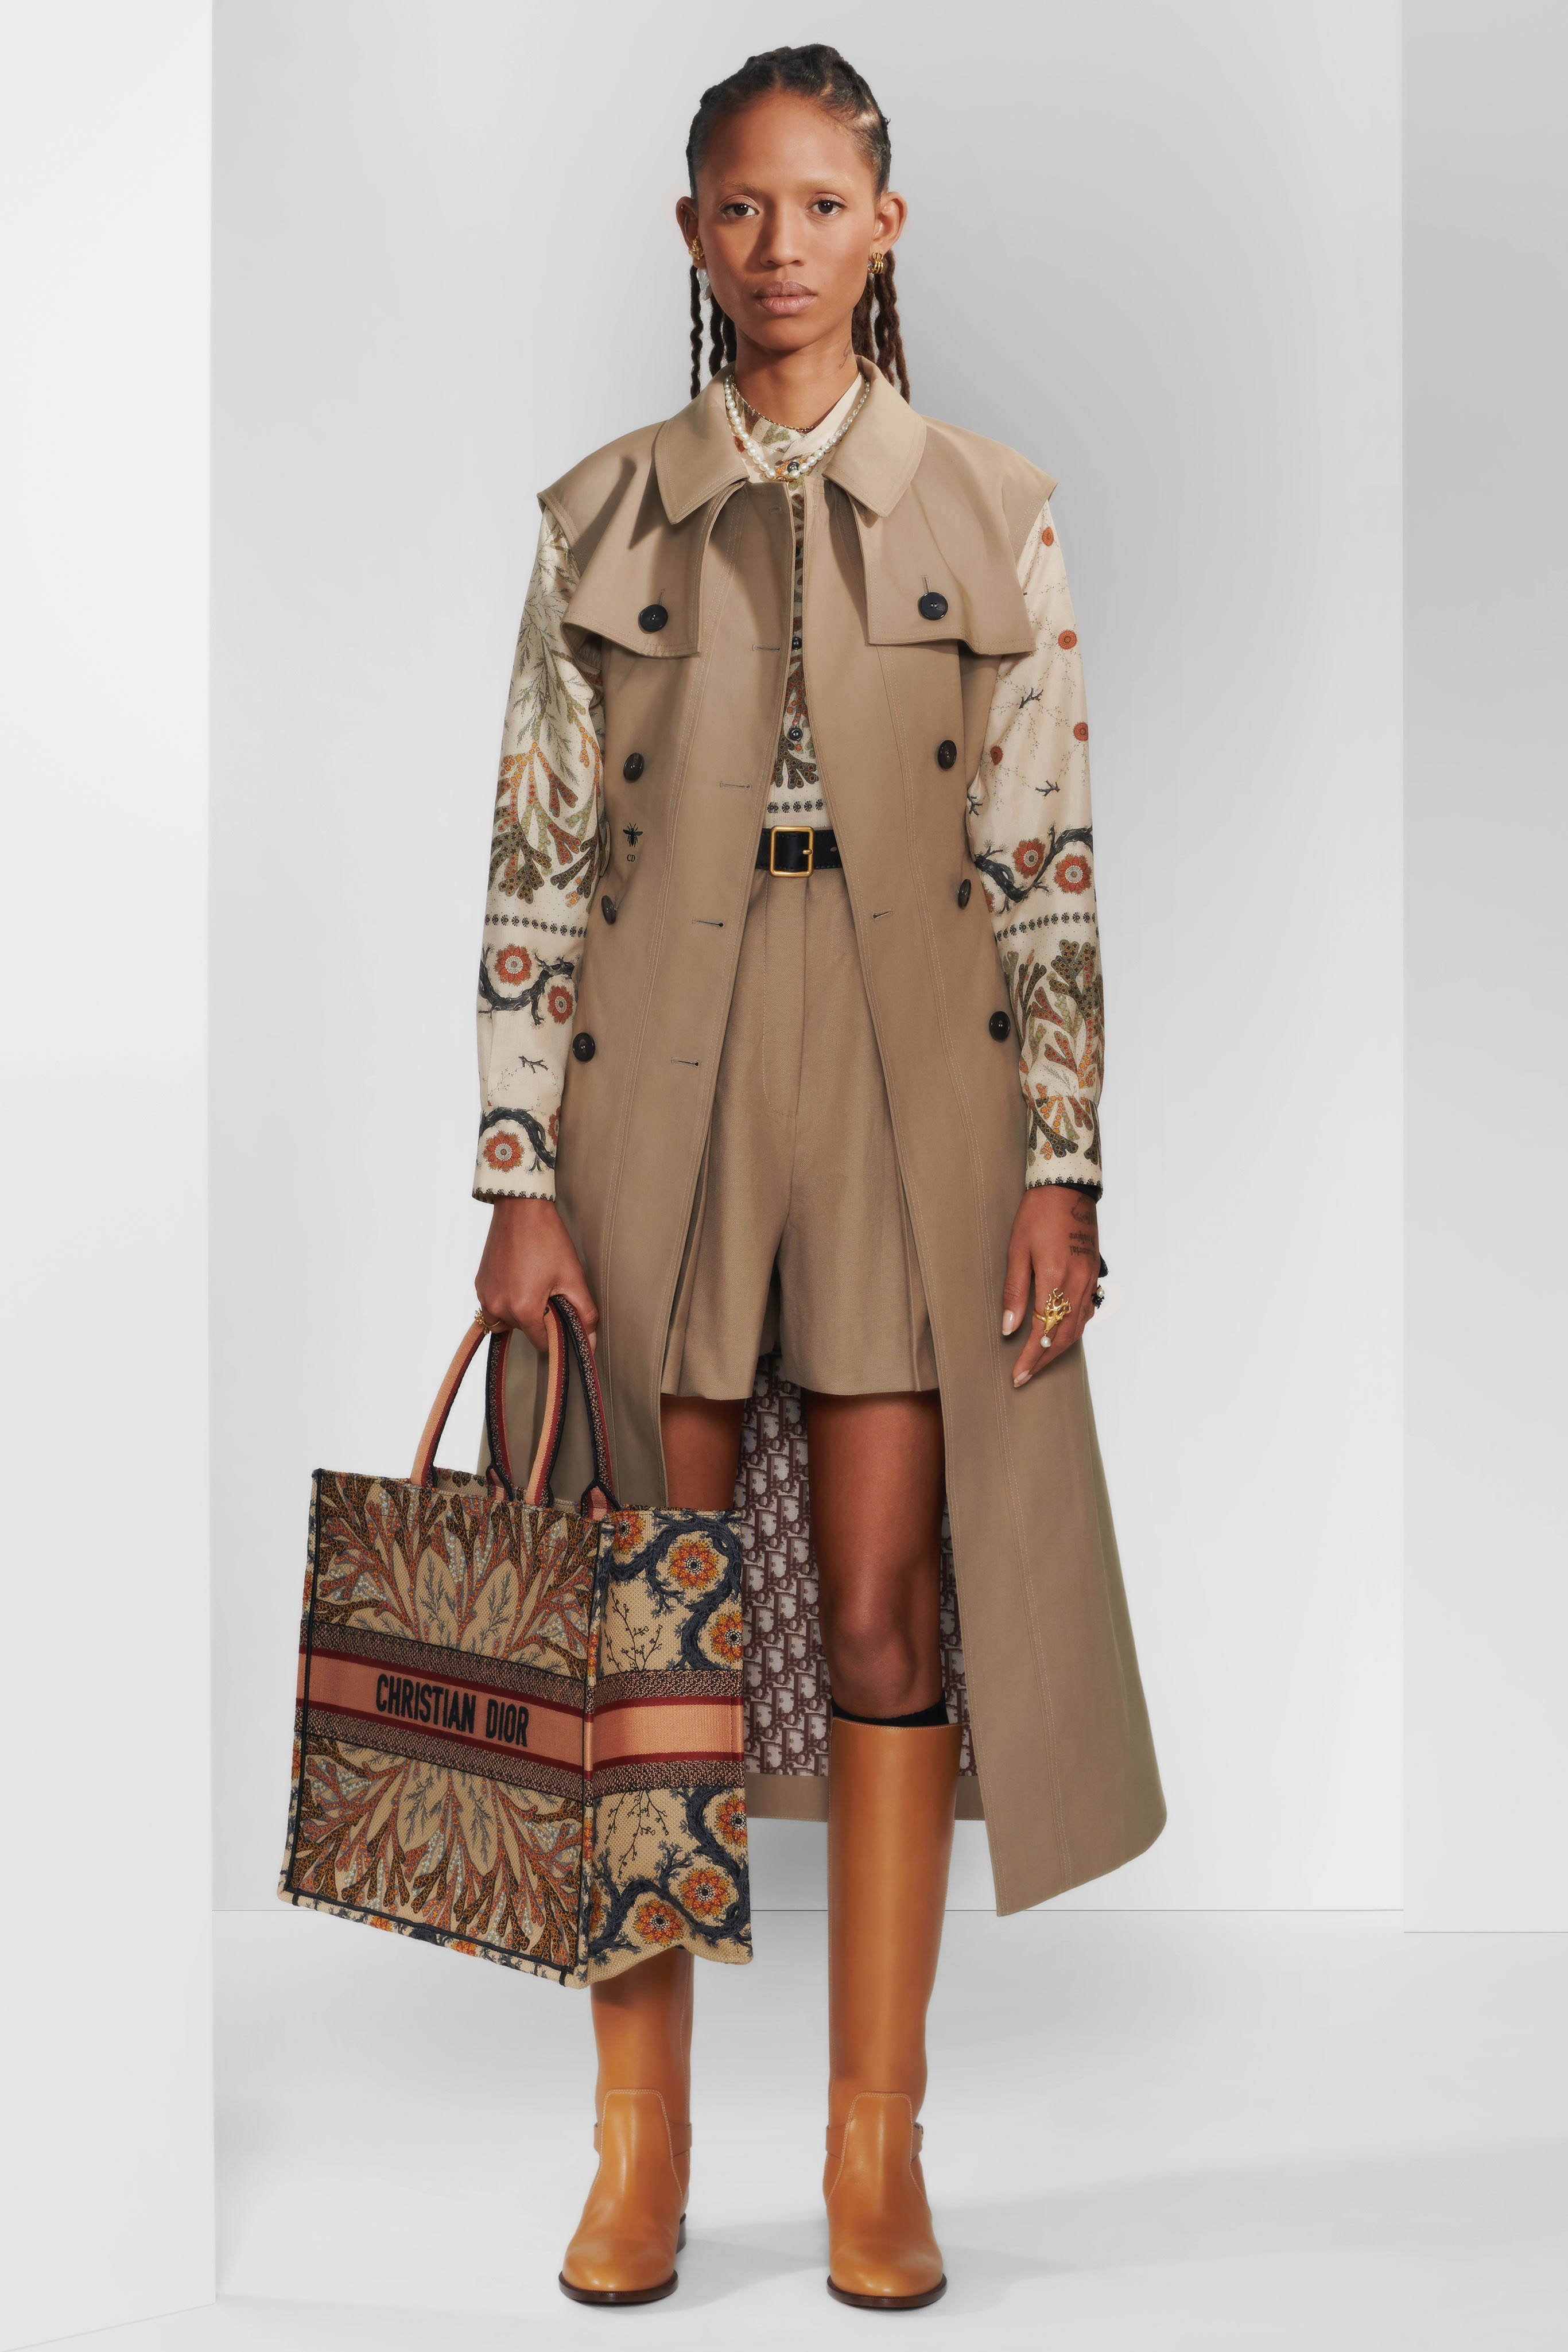 Dior Pre fall 2020 Lookbook trends runway coverage Ready To Wear Vogue sleeveless jacket vest